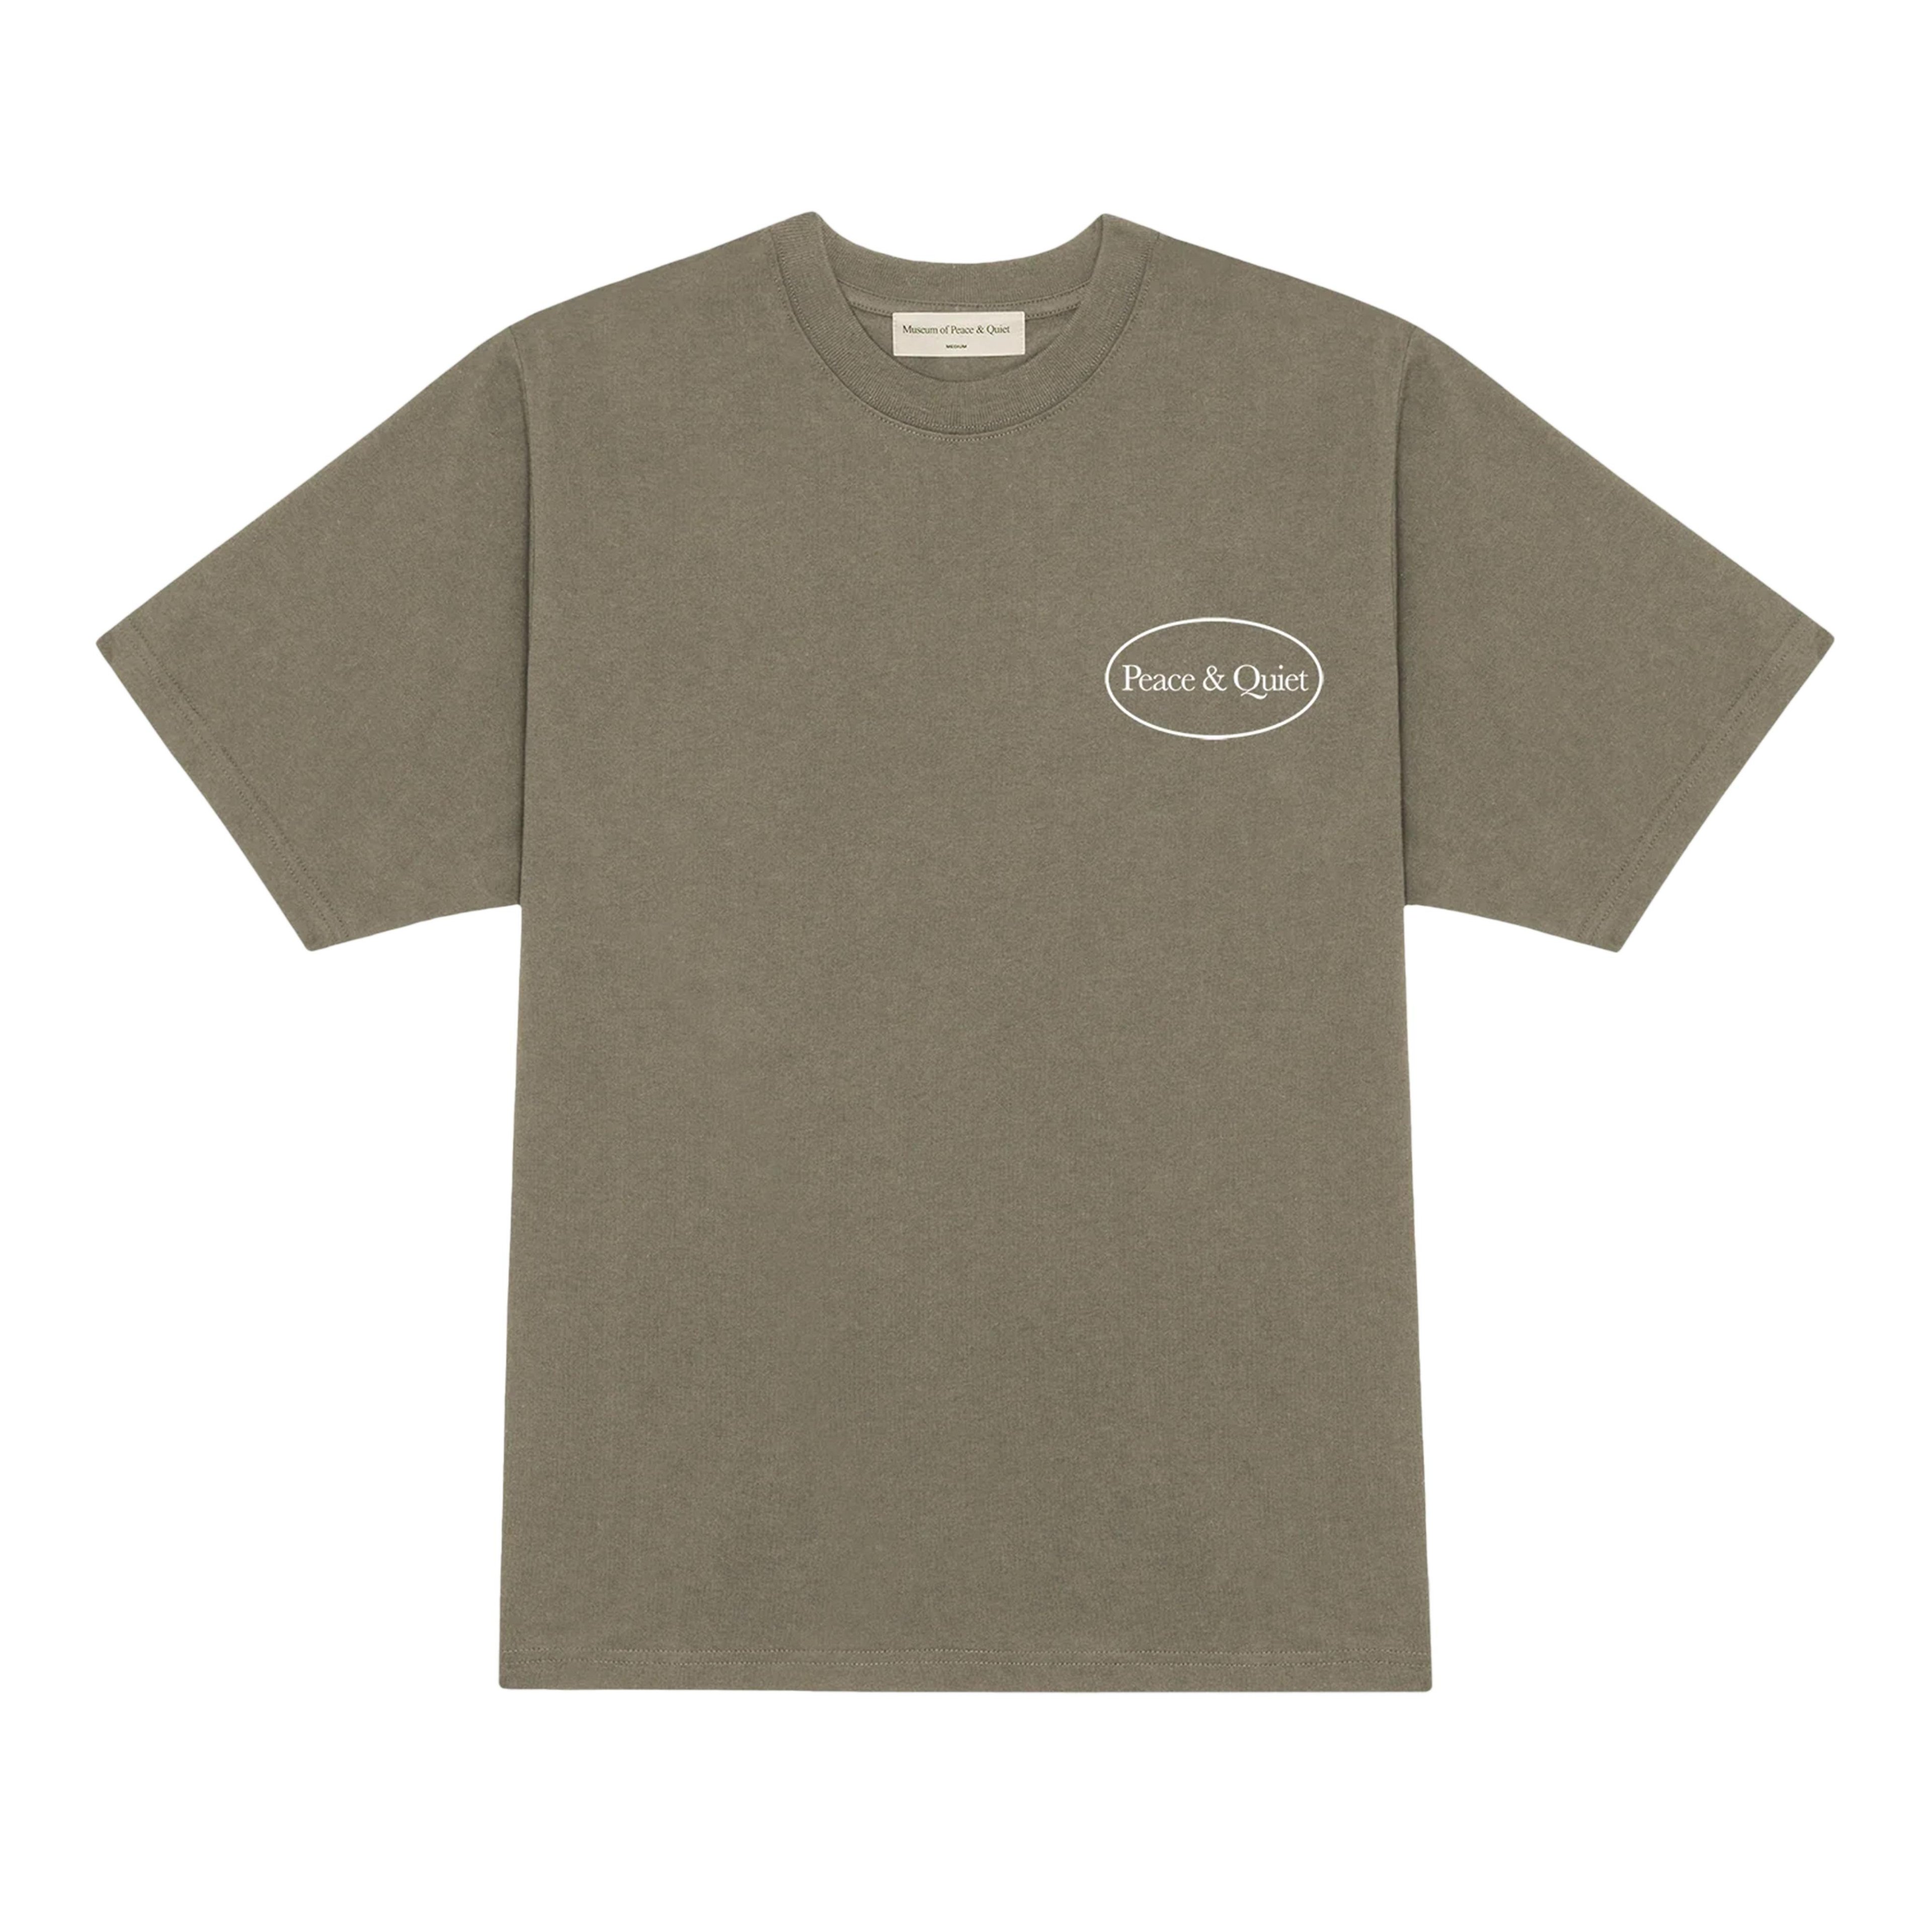 MUSEUM OF PEACE AND QUIET - Museum Hours T-Shirt - (Clay) by MUSEUM OF PEACE&QUIET